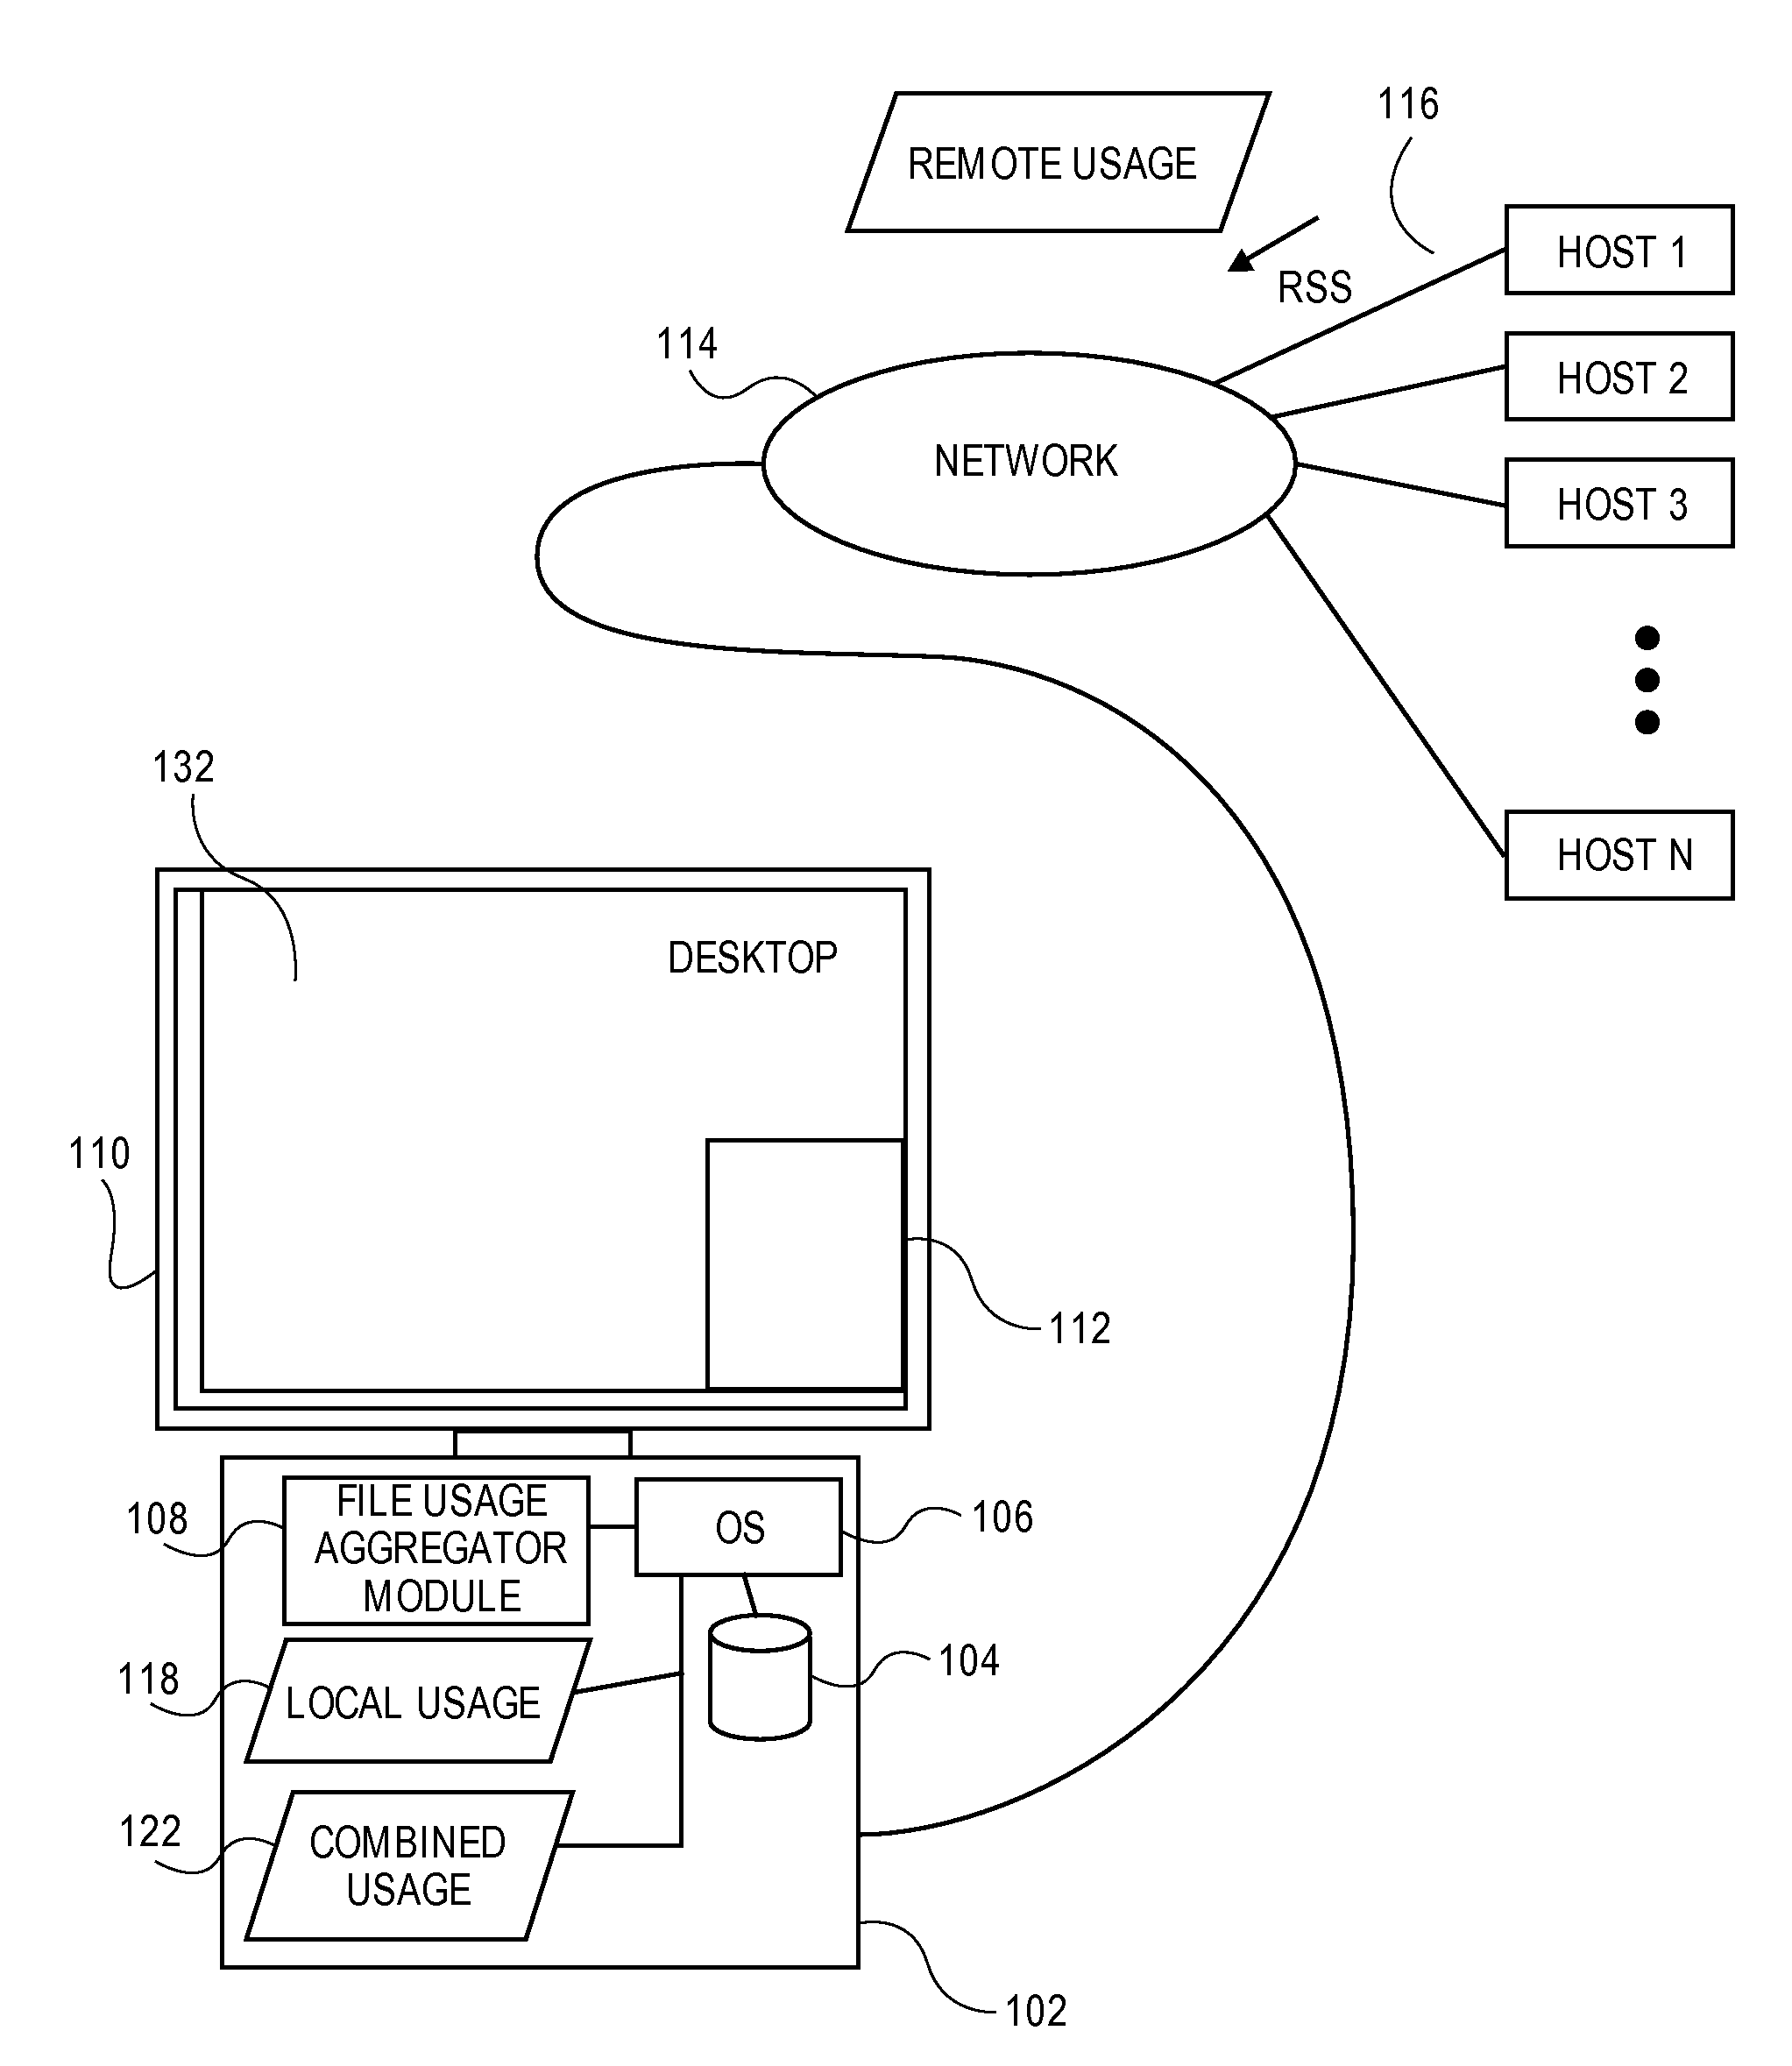 Systems and methods for generating file usage information